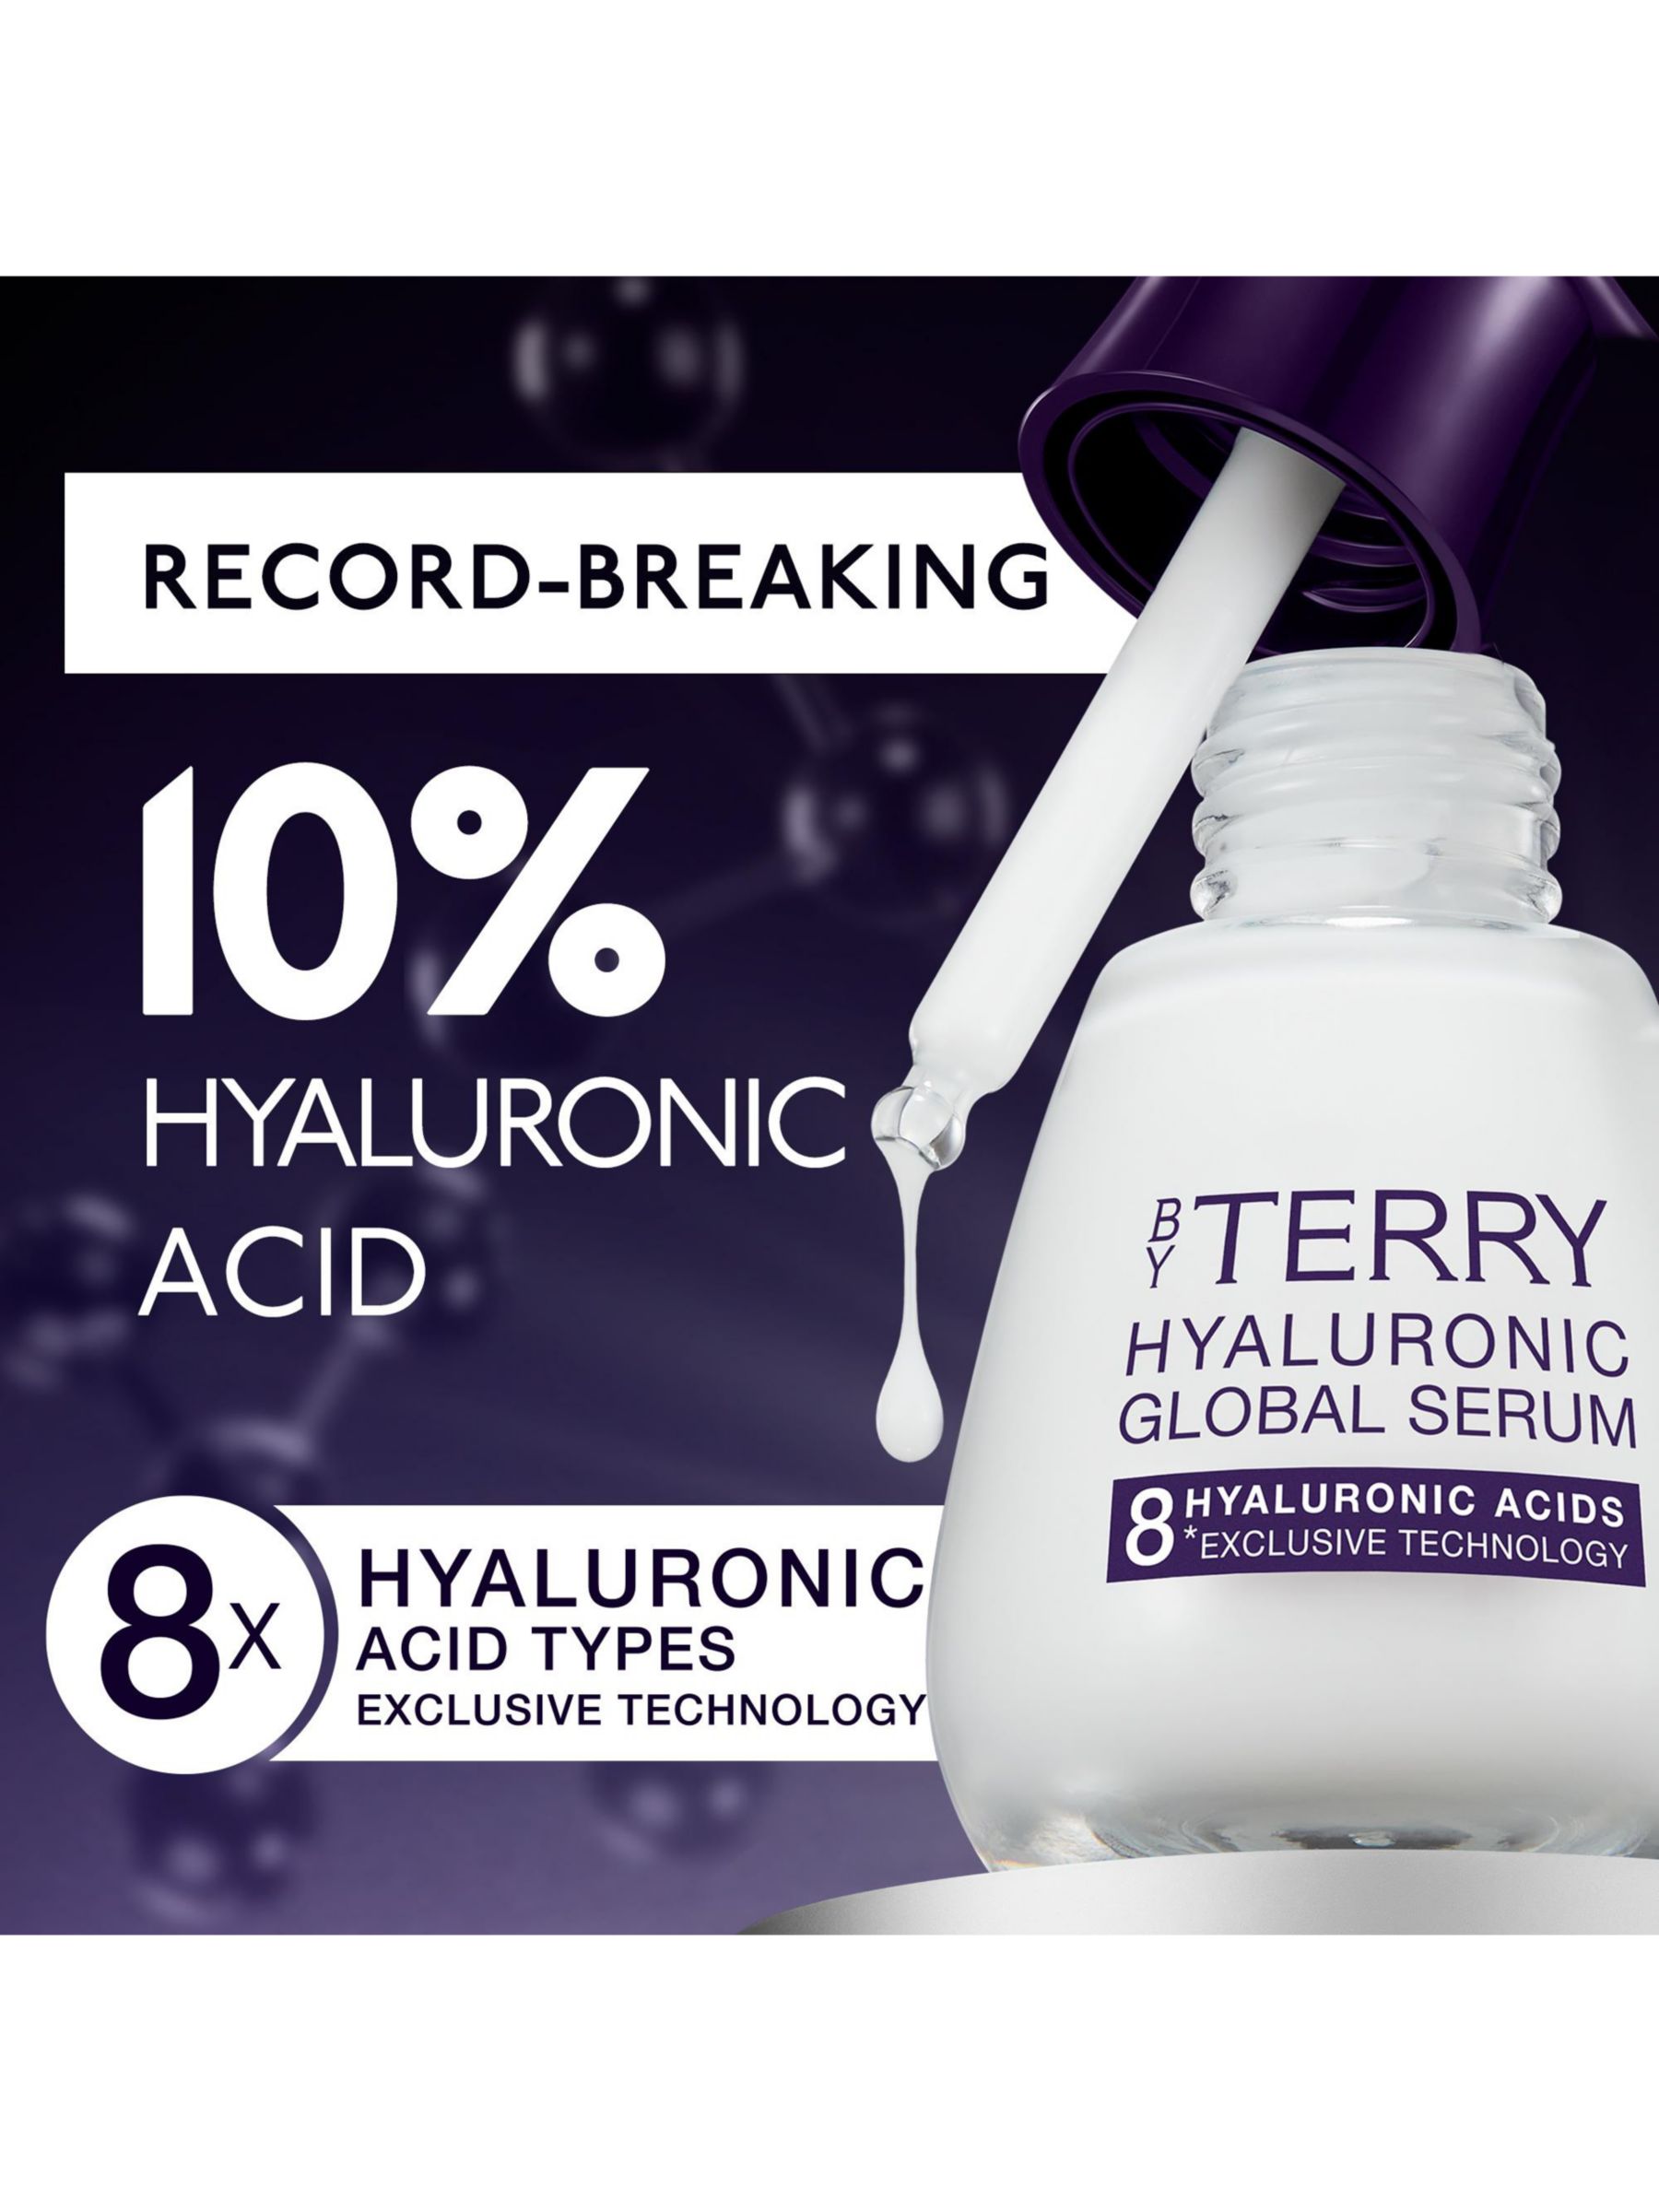 BY TERRY Hyaluronic Global Serum, 30ml 4